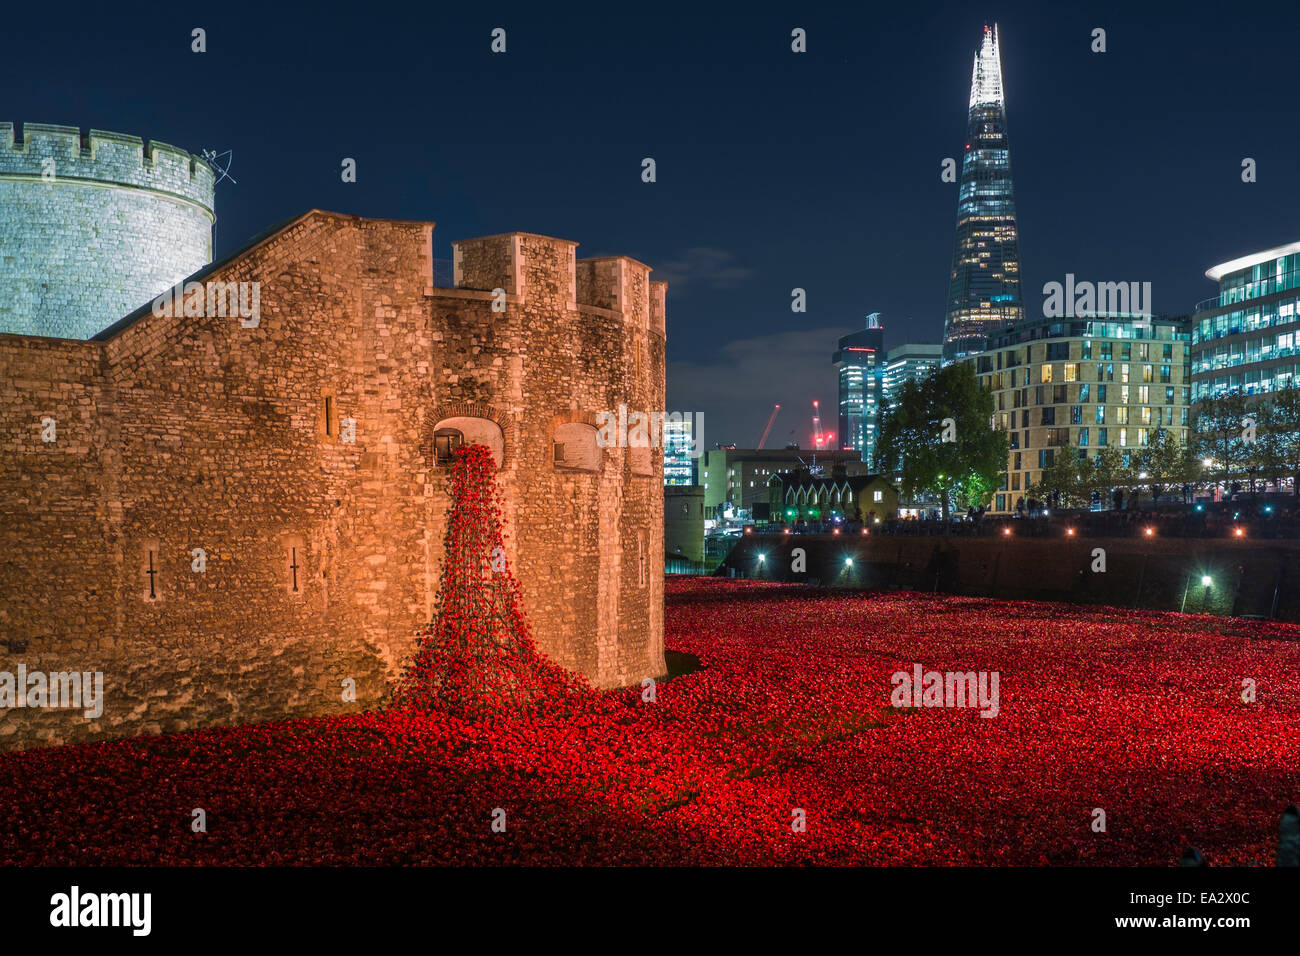 Blood Swept Lands And Seas Of Red at Night Stock Photo